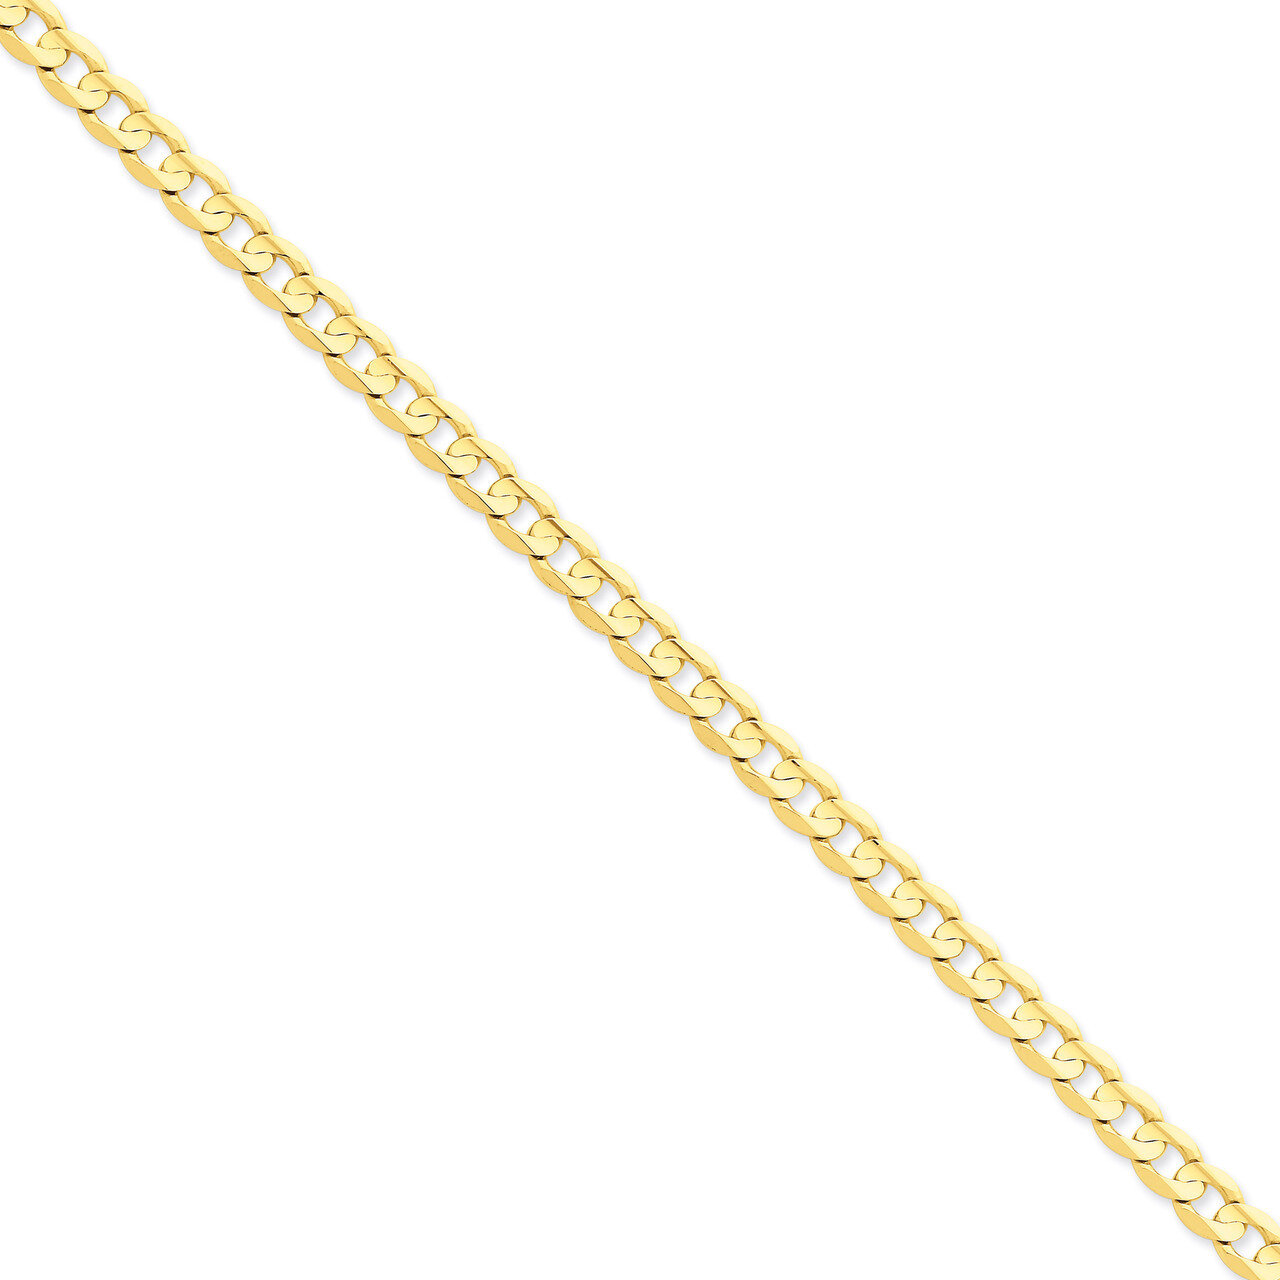 6.75mm Open Concave Curb Chain 9 Inch 14k Gold LCR180-9